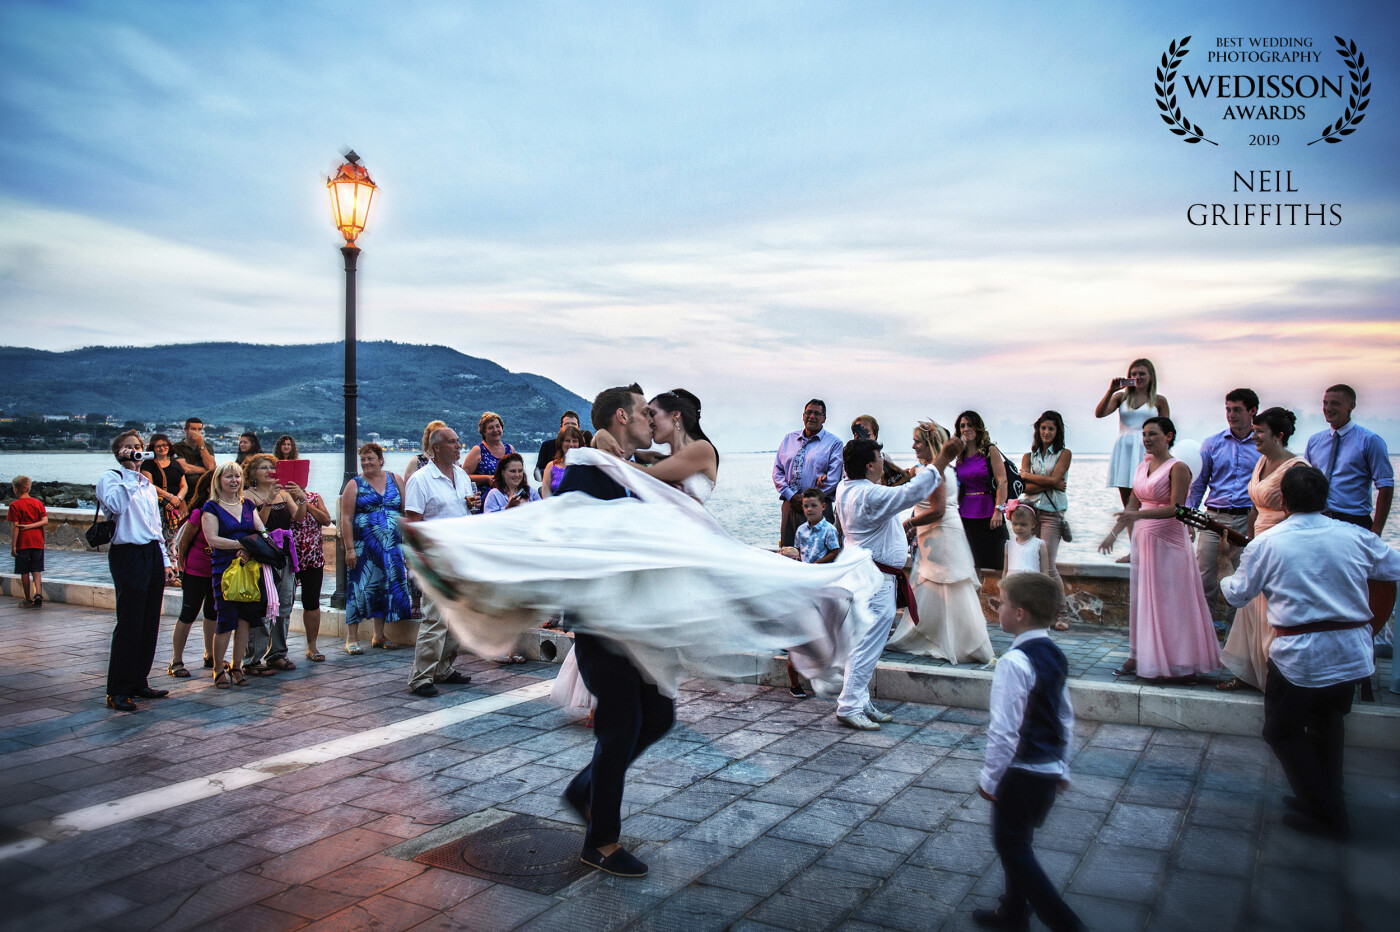 Taken at dusk in a place called Santa Maria Di Castellabate on the Italian coast. Steph and Danny were walking along the coastal path with their guests, when the local musicians broke into a rendition of Dean Martin's 'Amore'. A magical moment, it means a lot to me, because it tells the story of their wedding in one photo. 